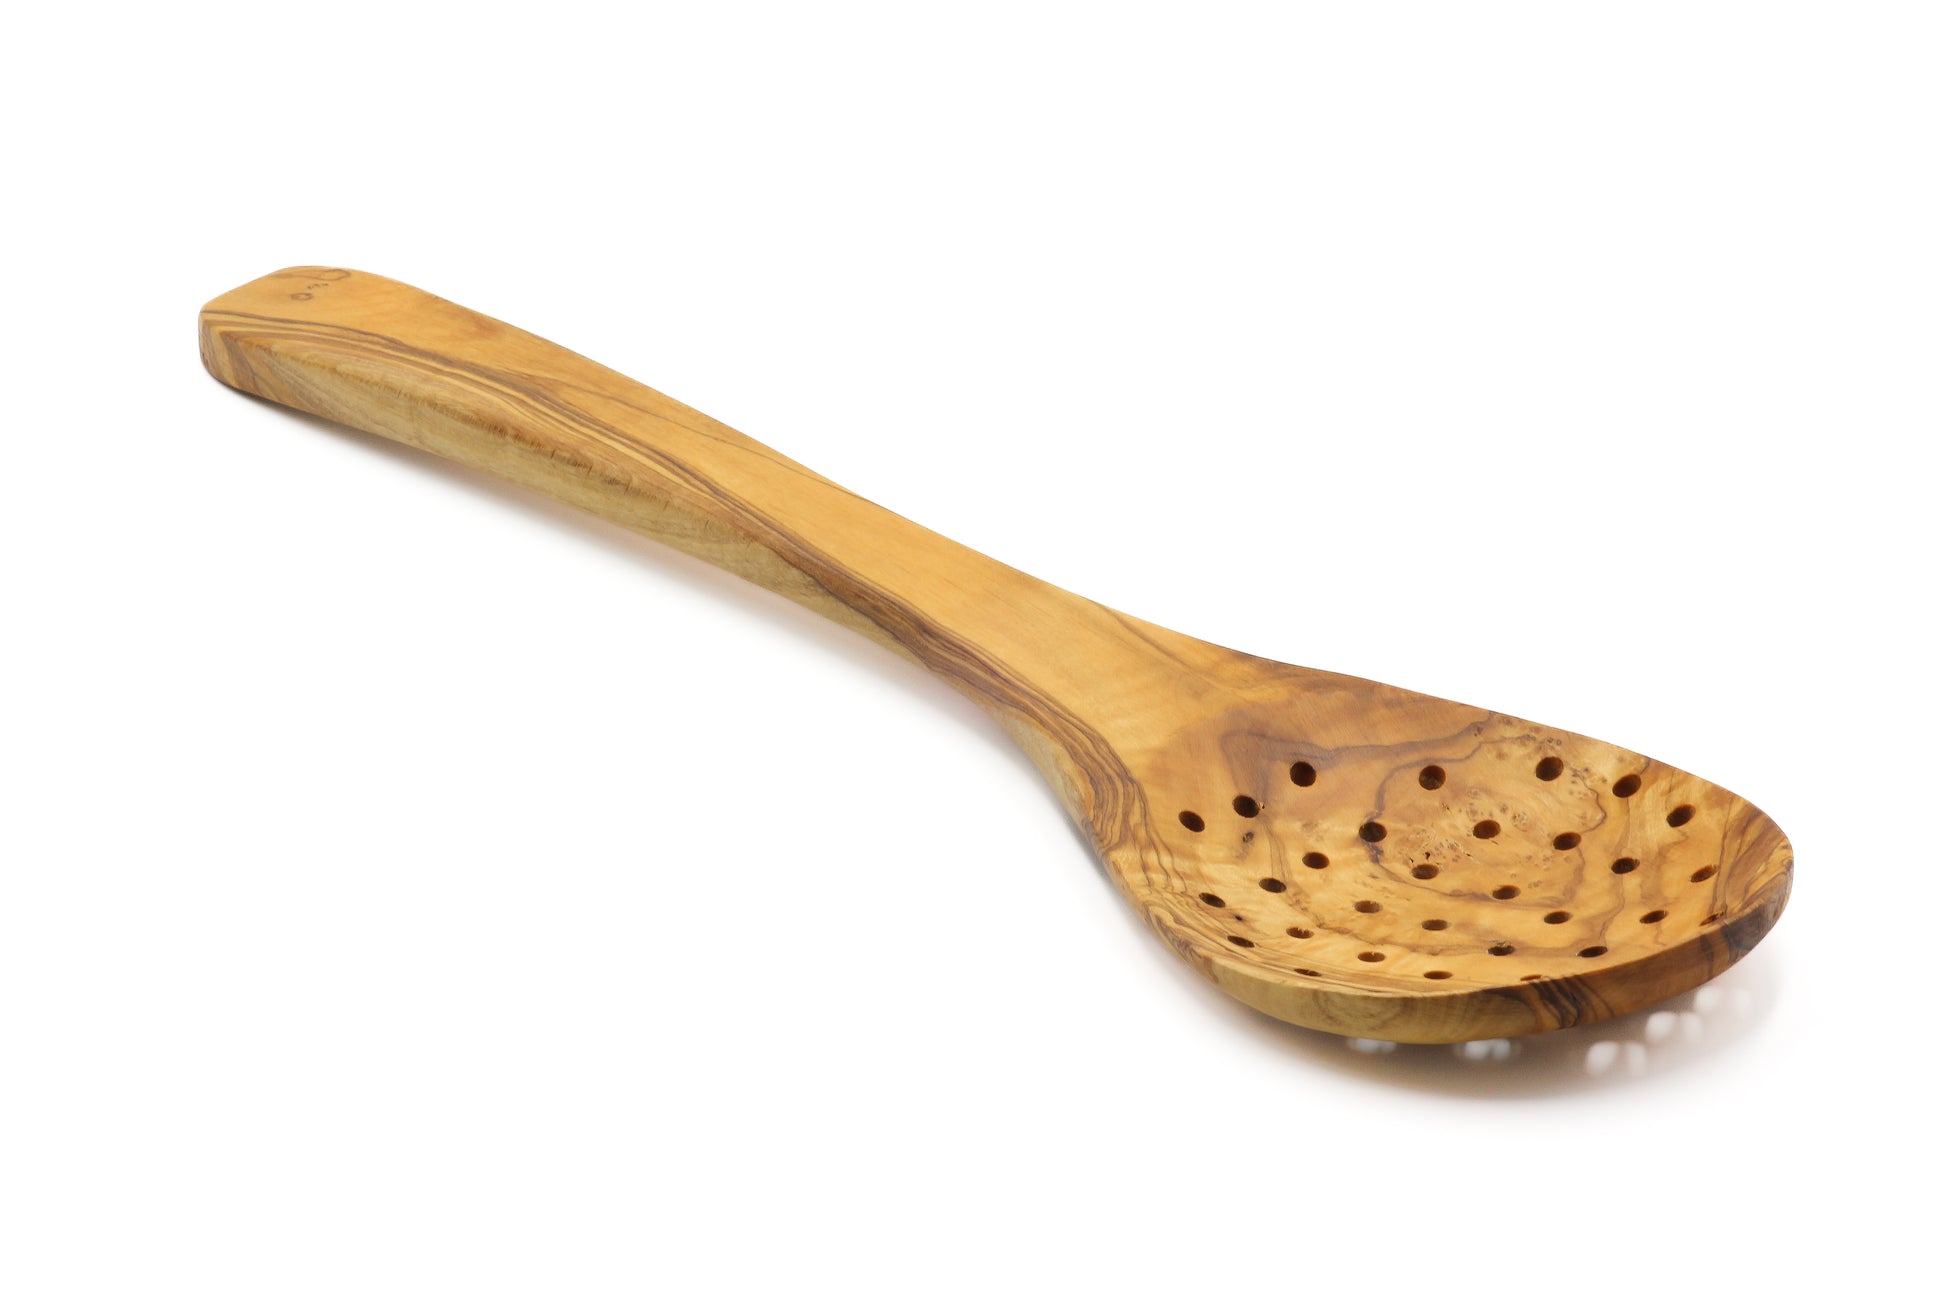 Olive wood sieve, skimmer, and serving spoon